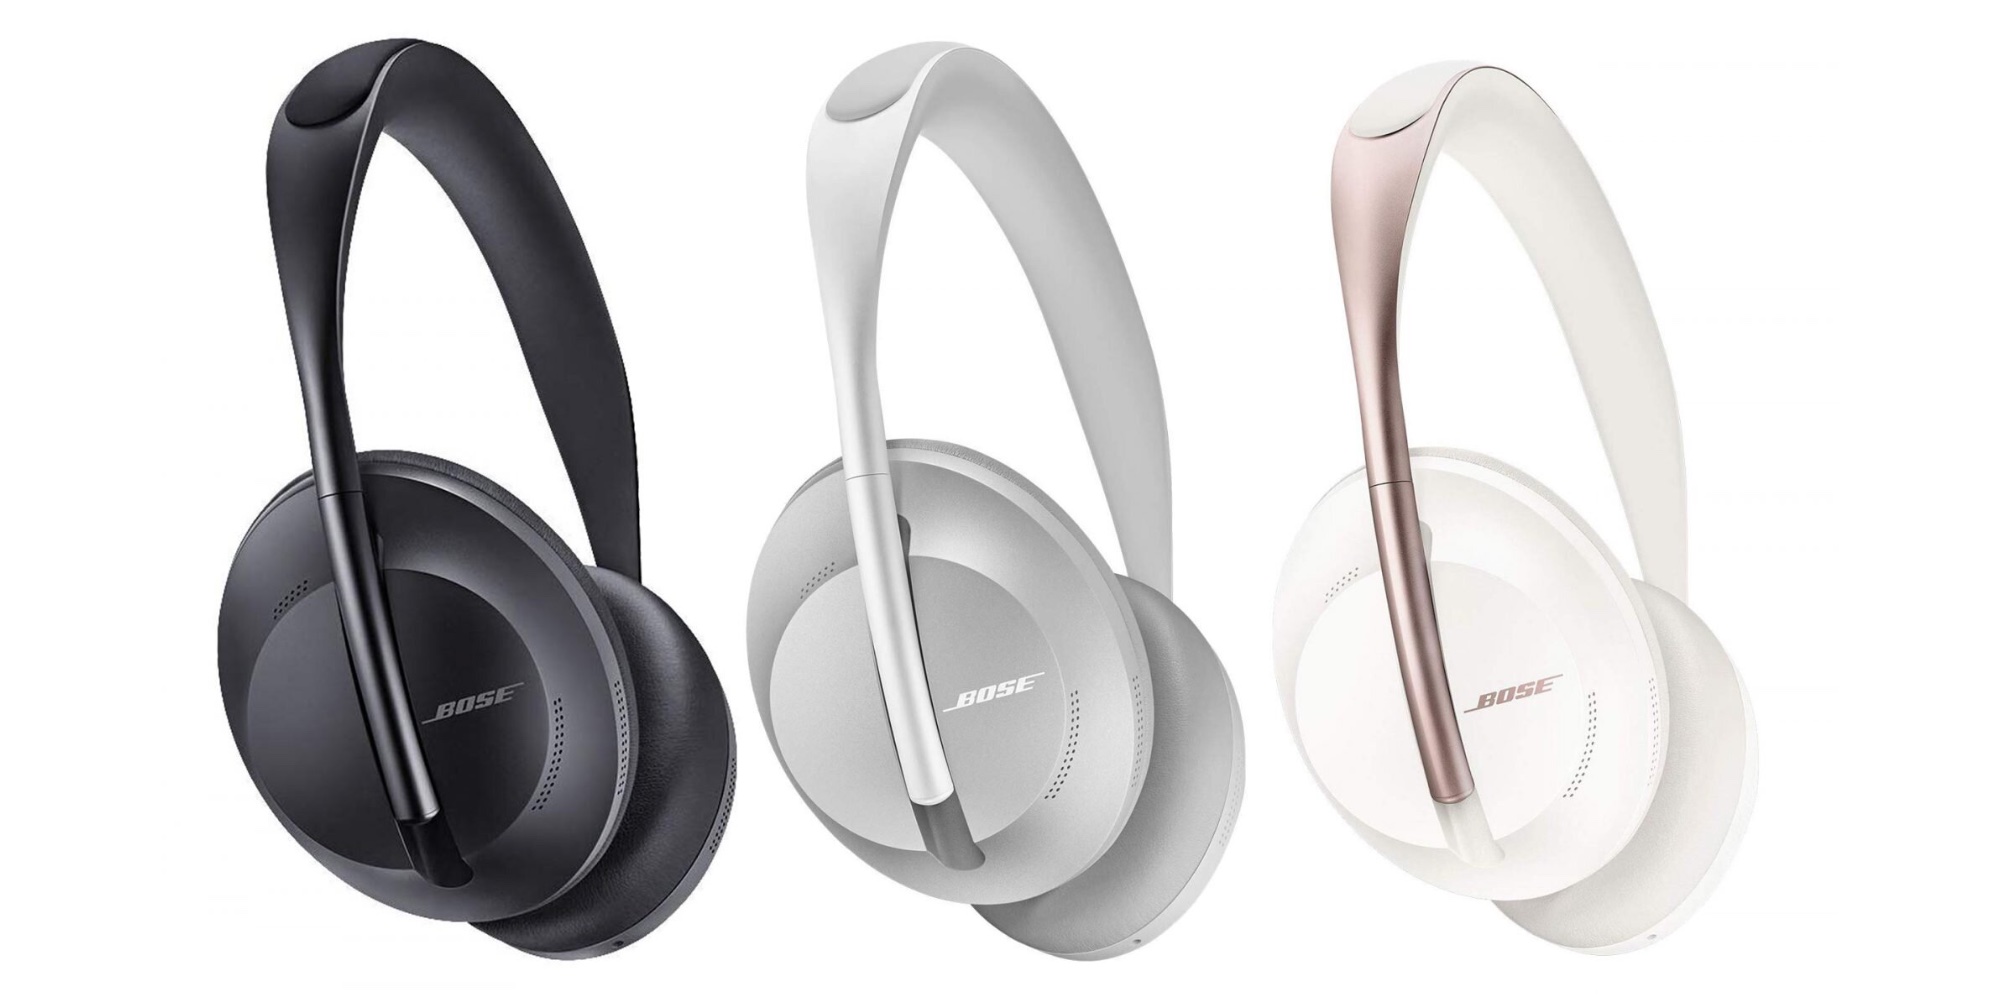 Bose Headphones 700 deliver best-in-class ANC starting at $237 (Reg.